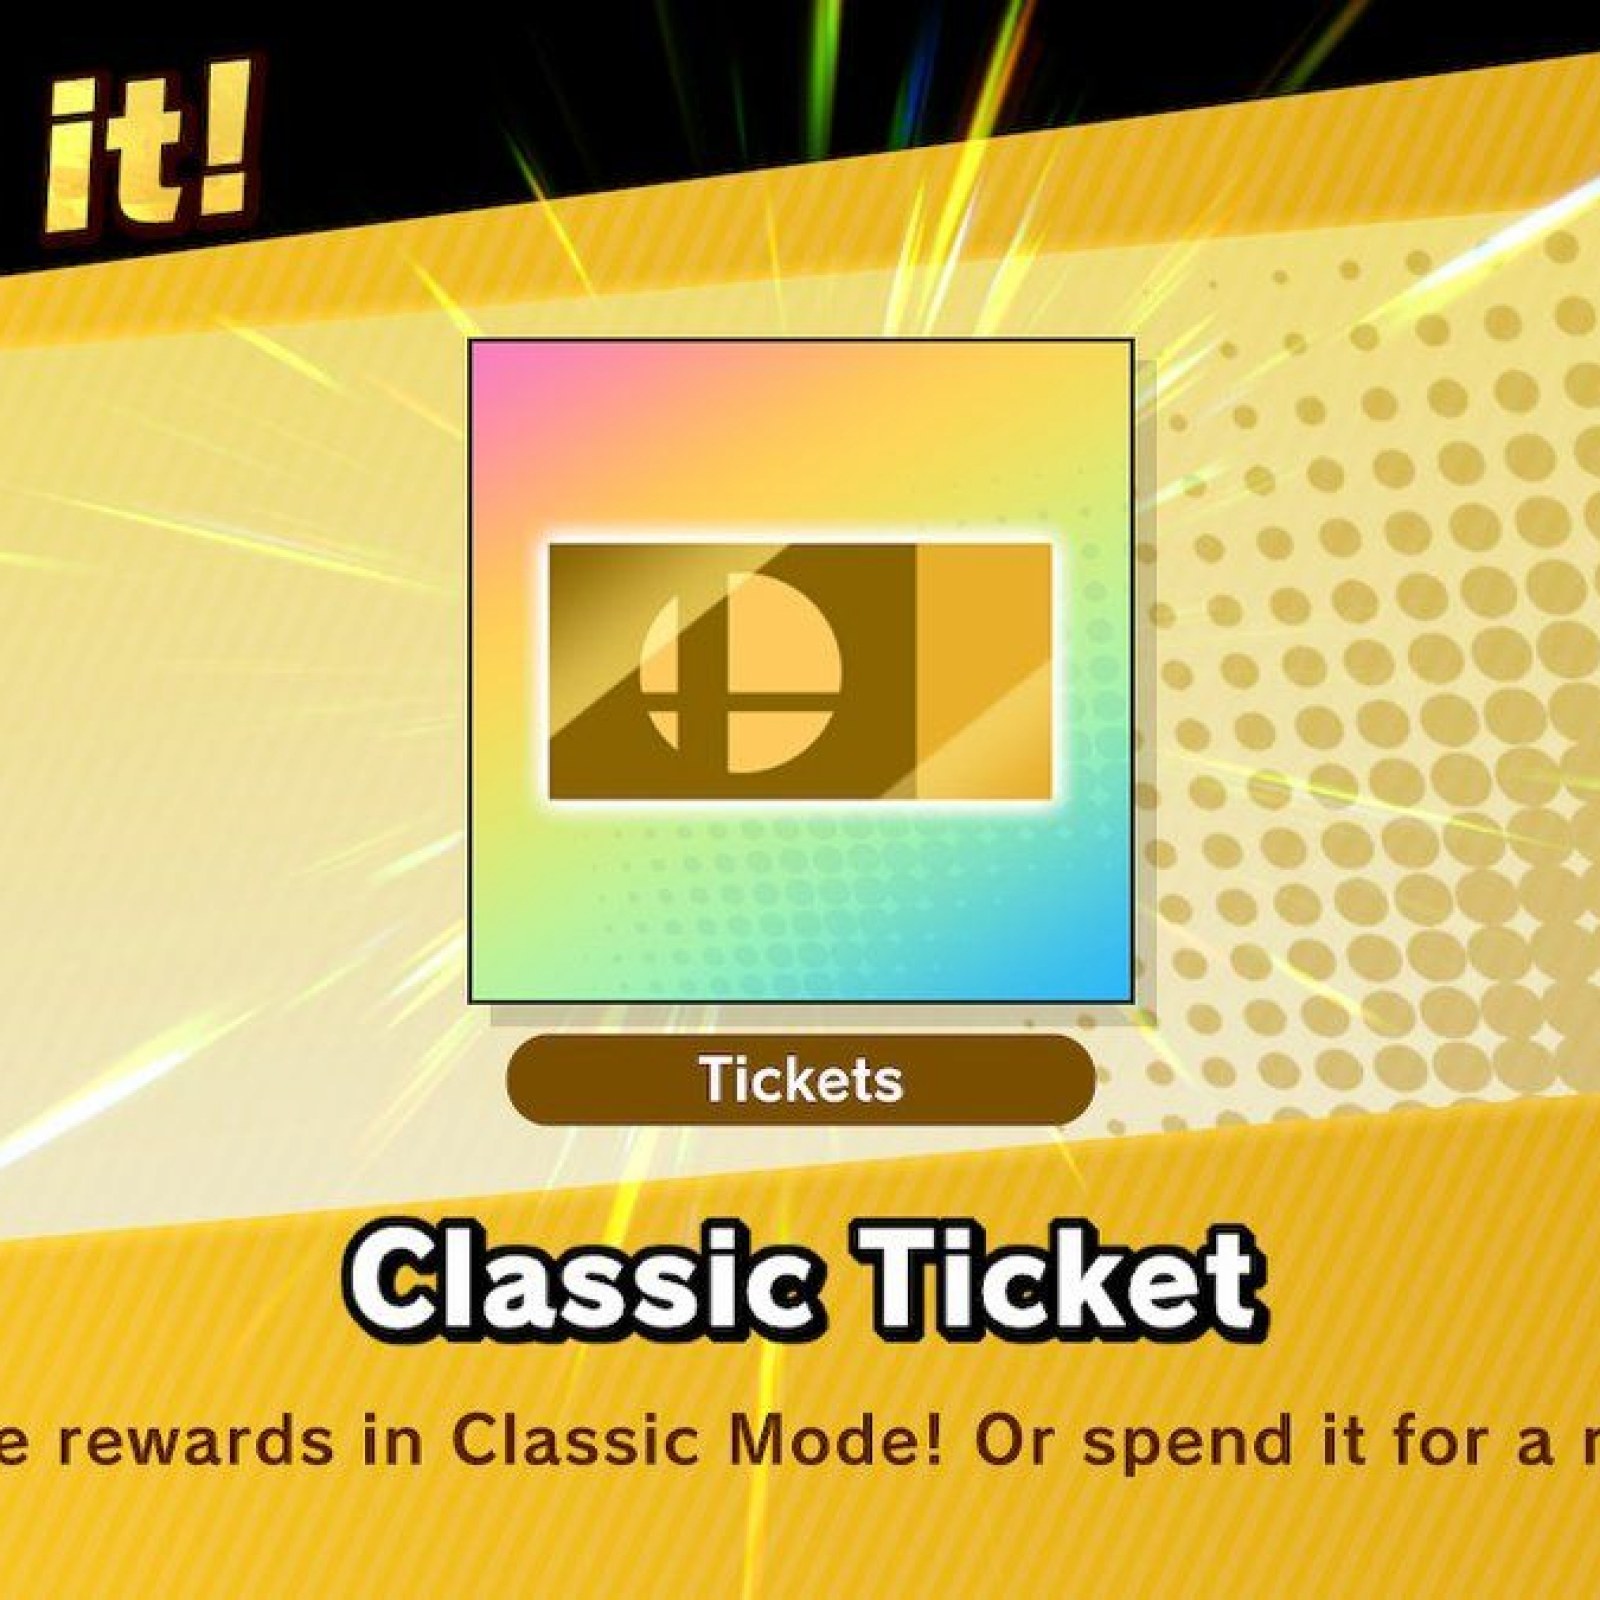 Smash Ultimate Classic Tickets How To Get More And What They Do - becoming phill cómo conseguir robux gratis 100 real